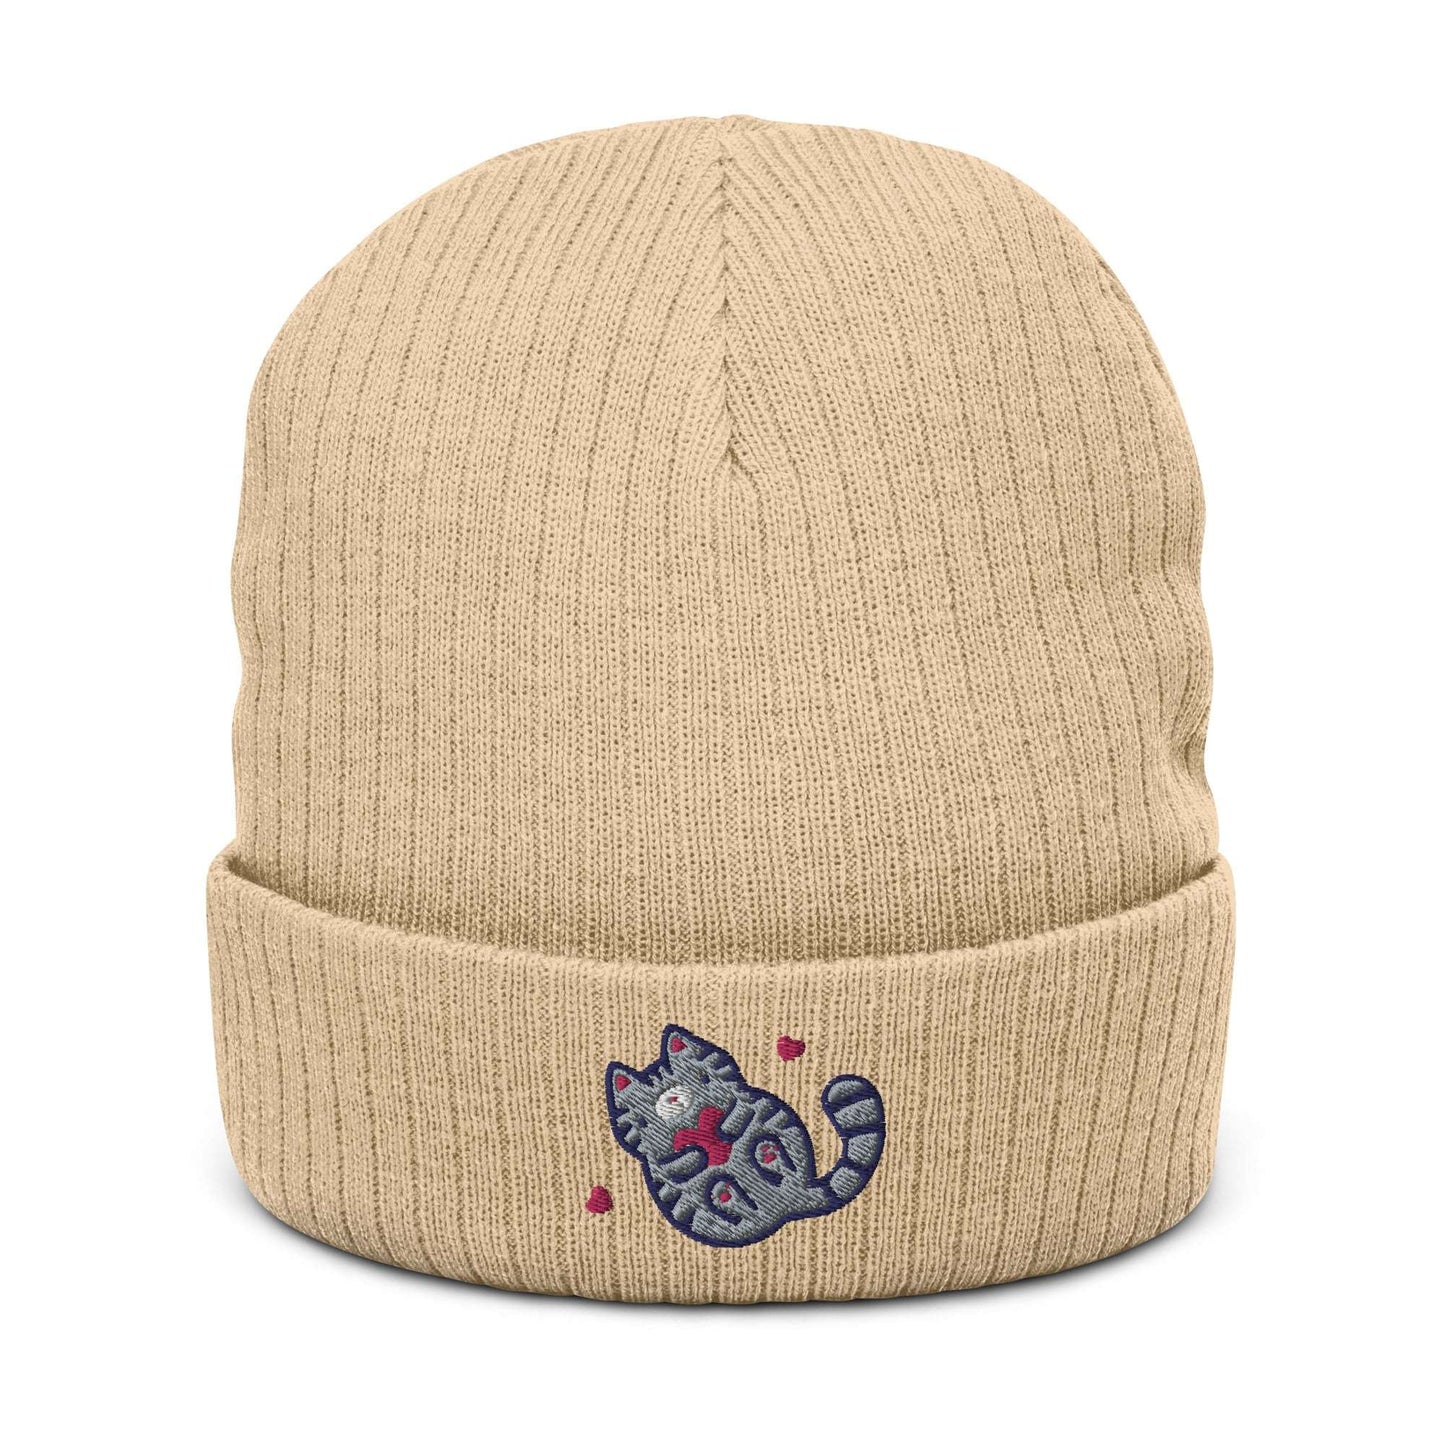 Ribbed Beanie with Embroidered Grey Tabby Cat. Unisex Toque: Beige